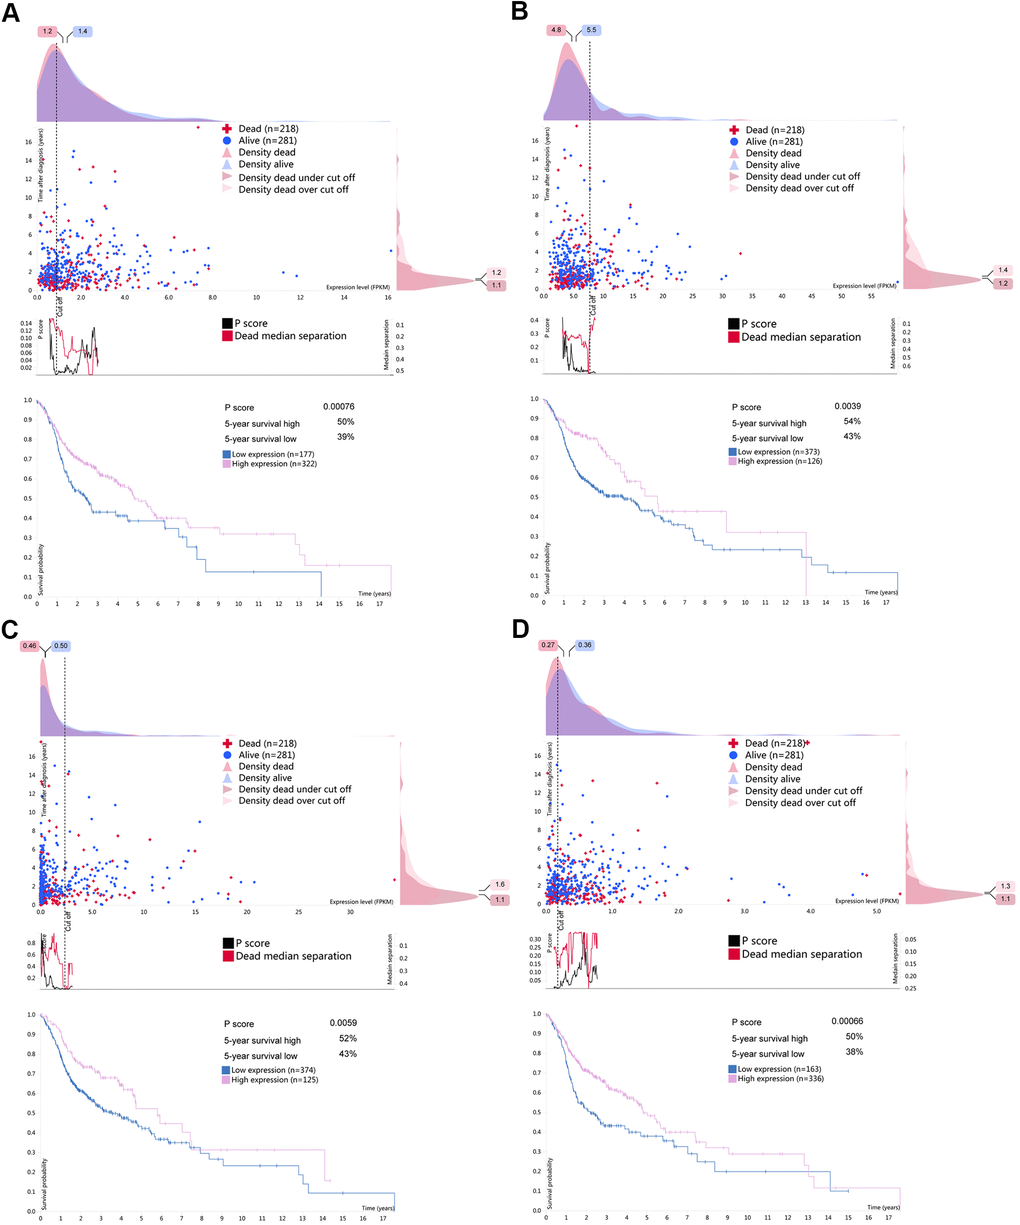 Survival associated RBPs expression in the human protein atlas database (HPA). Kaplan-Meier curves of survival associated (A) CELF2, (B) EZH2, (C) RNASE10 and (D) SIDT1 for HNSCC patients. Pink line indicates high expression group while blue line indicates low expression group.